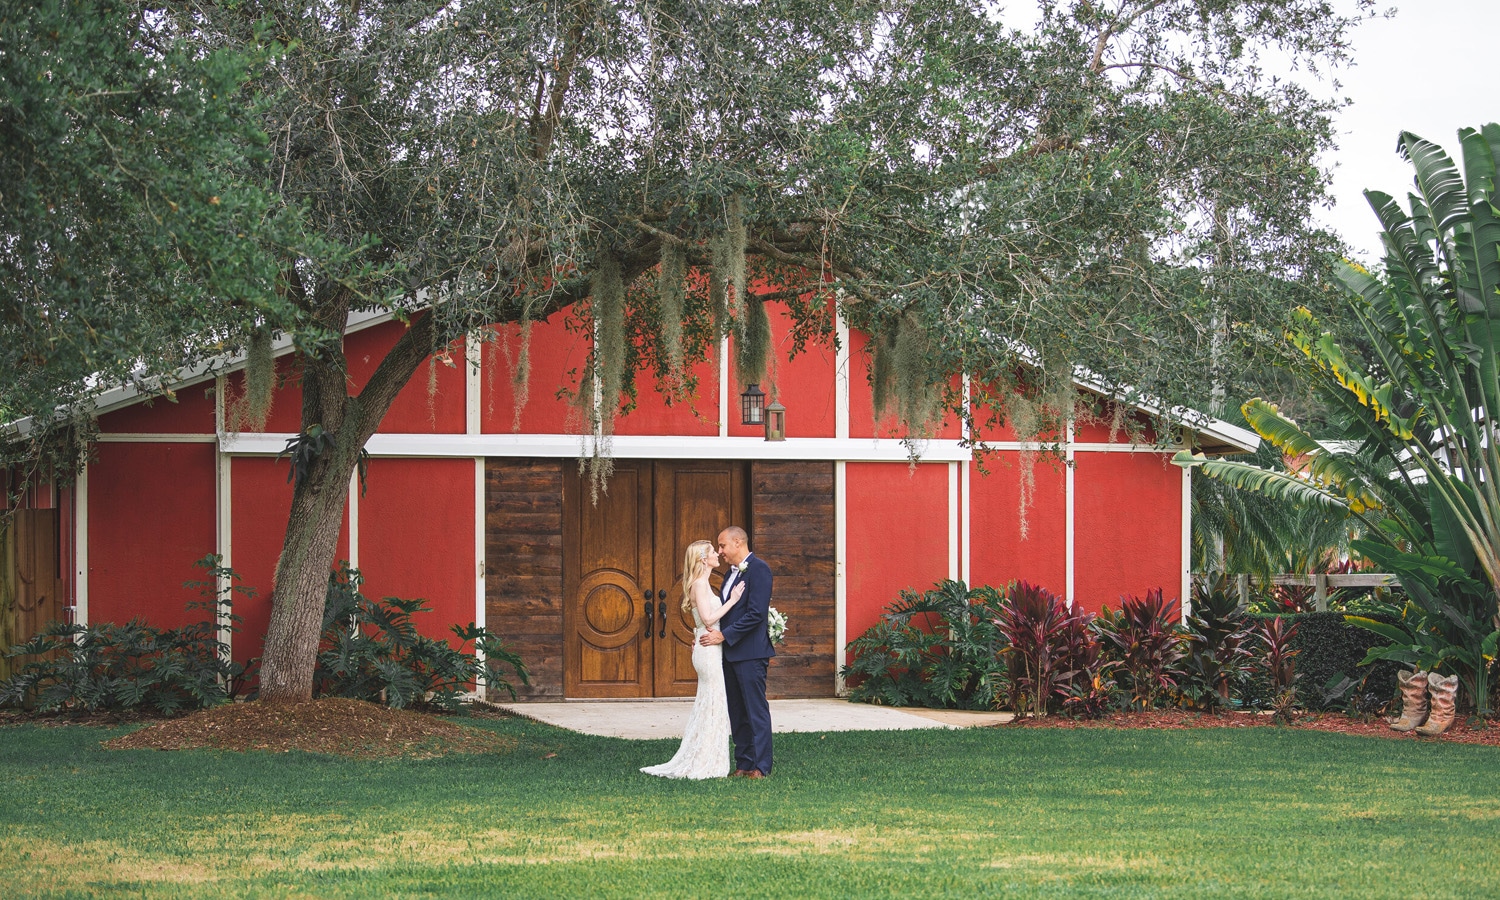 How To Select Your Favorite Wedding Venue